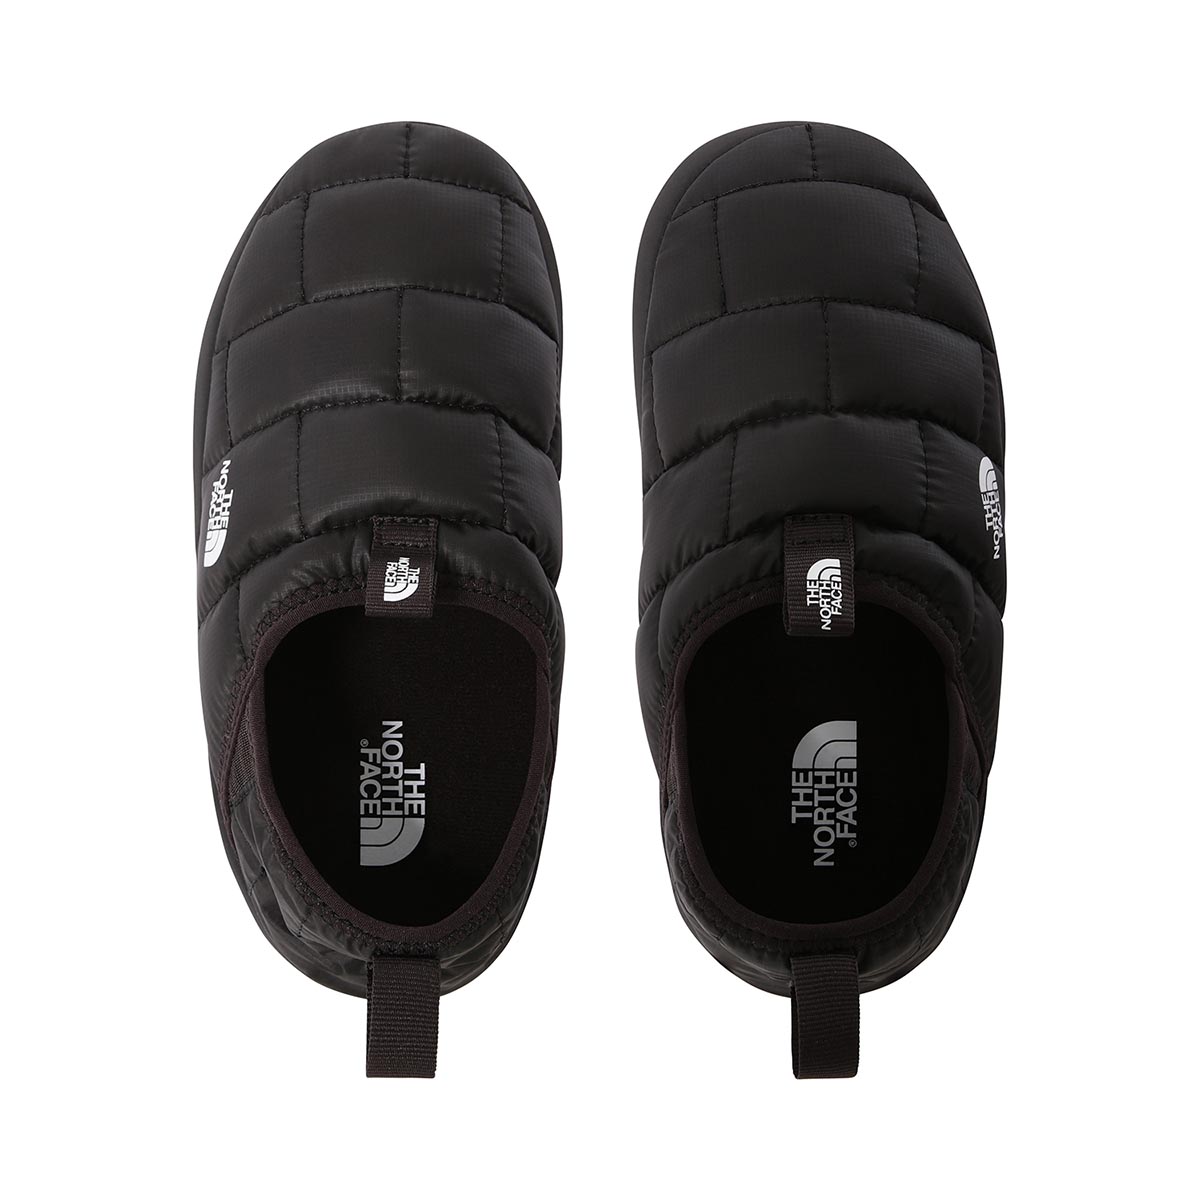 THE NORTH FACE - THERMOBALL TRACTION WINTER MULES II